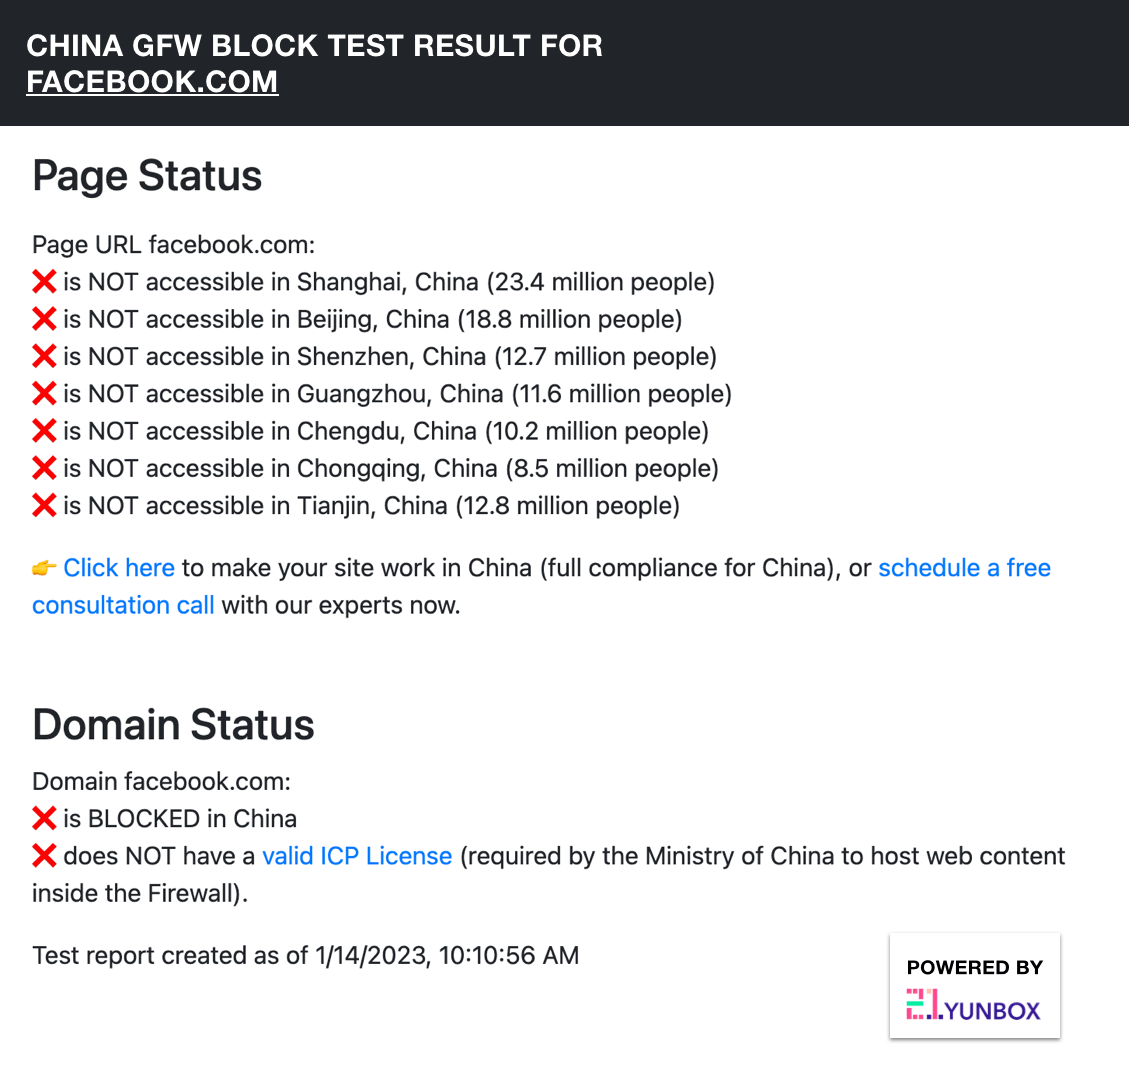 Is My Site Blocked in China?